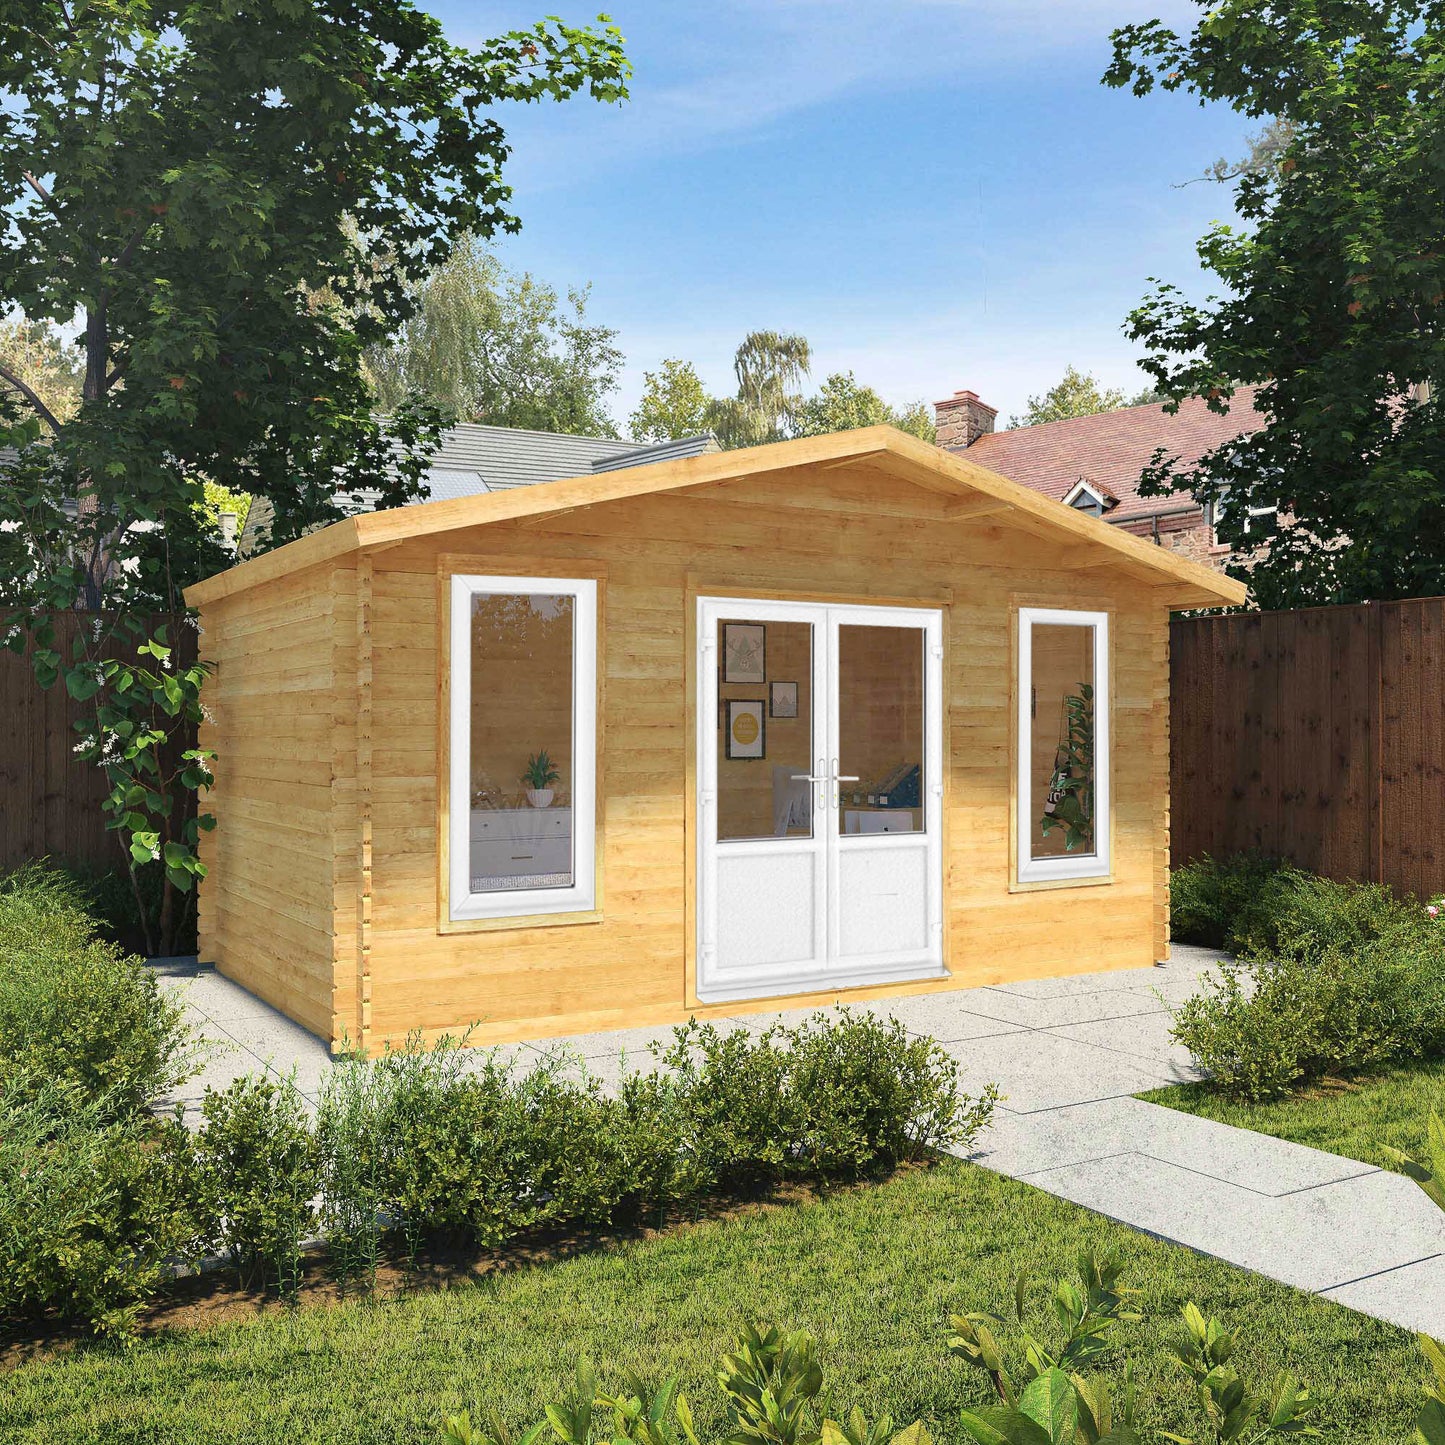 The 5m x 3m Sparrow Log Cabin